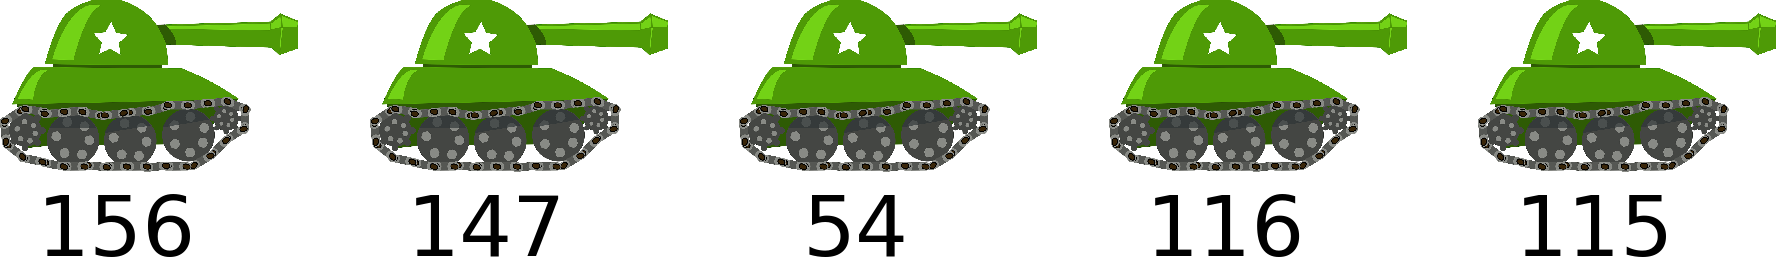 A random sample (without replacement) of German tanks and their inscribed serial numbers. Based on this outcome, how many tanks do you estimate the Germans have?